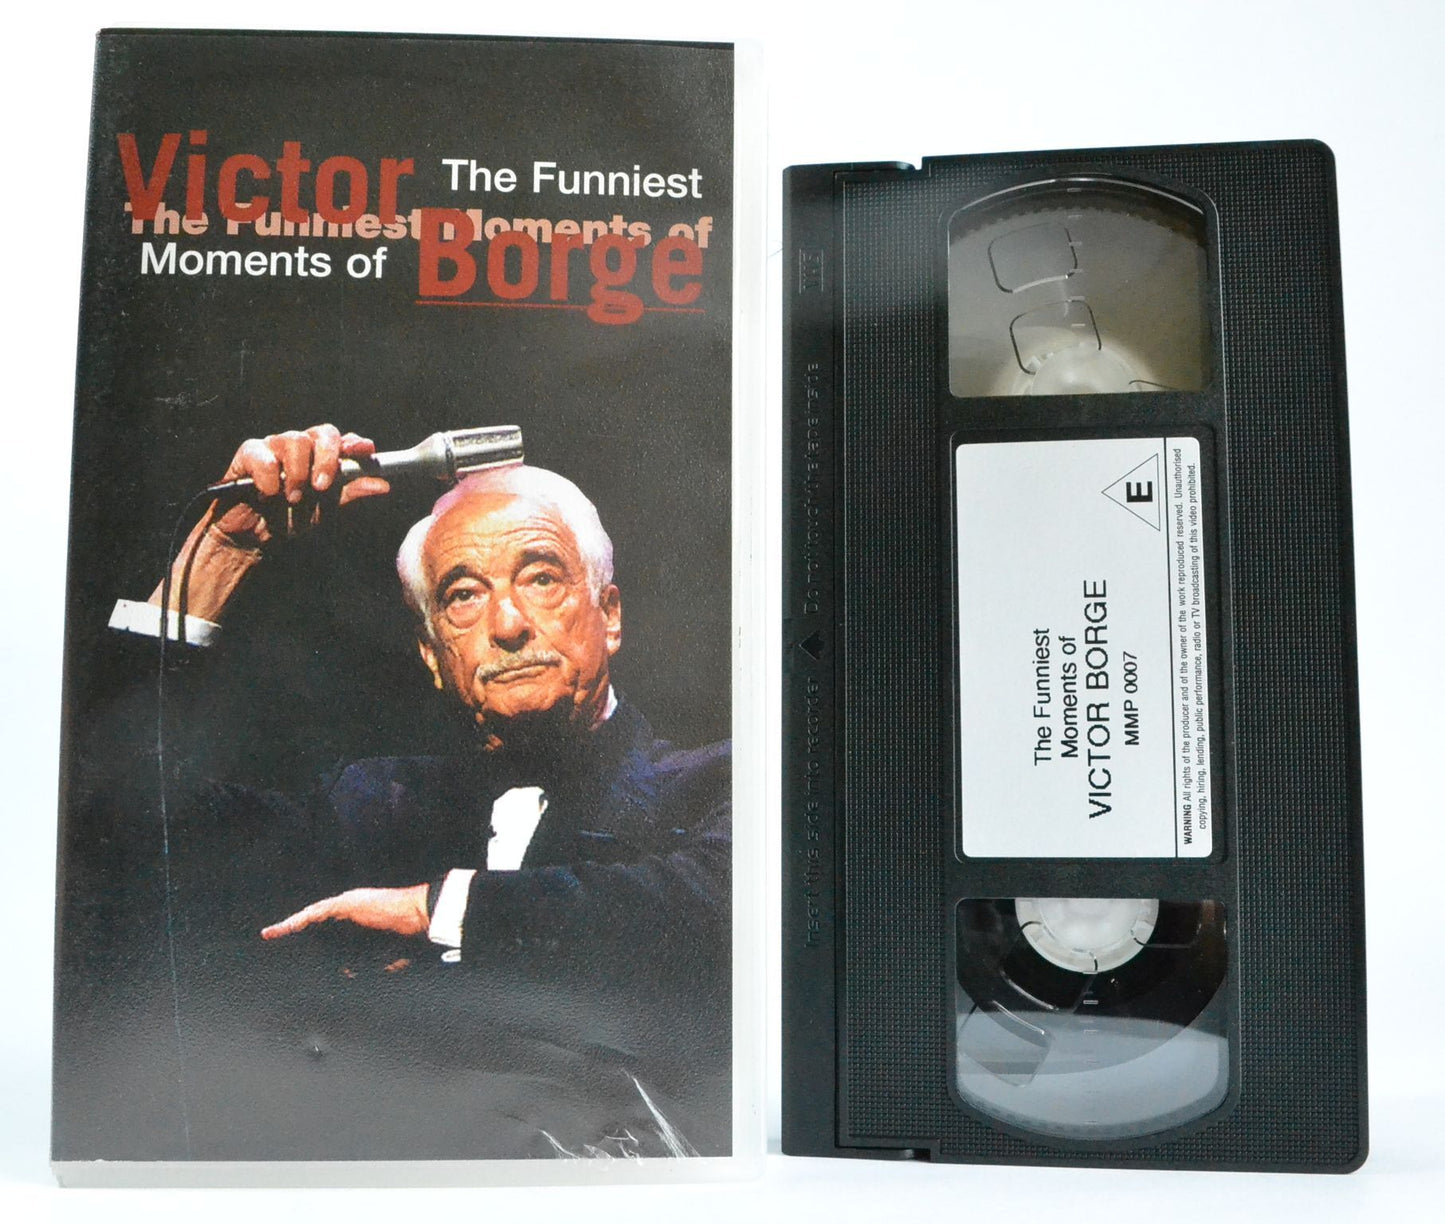 The Funniest Moments Of Victor Borge: 12 Classic Routines - Comedy Master - Pal - VHS-